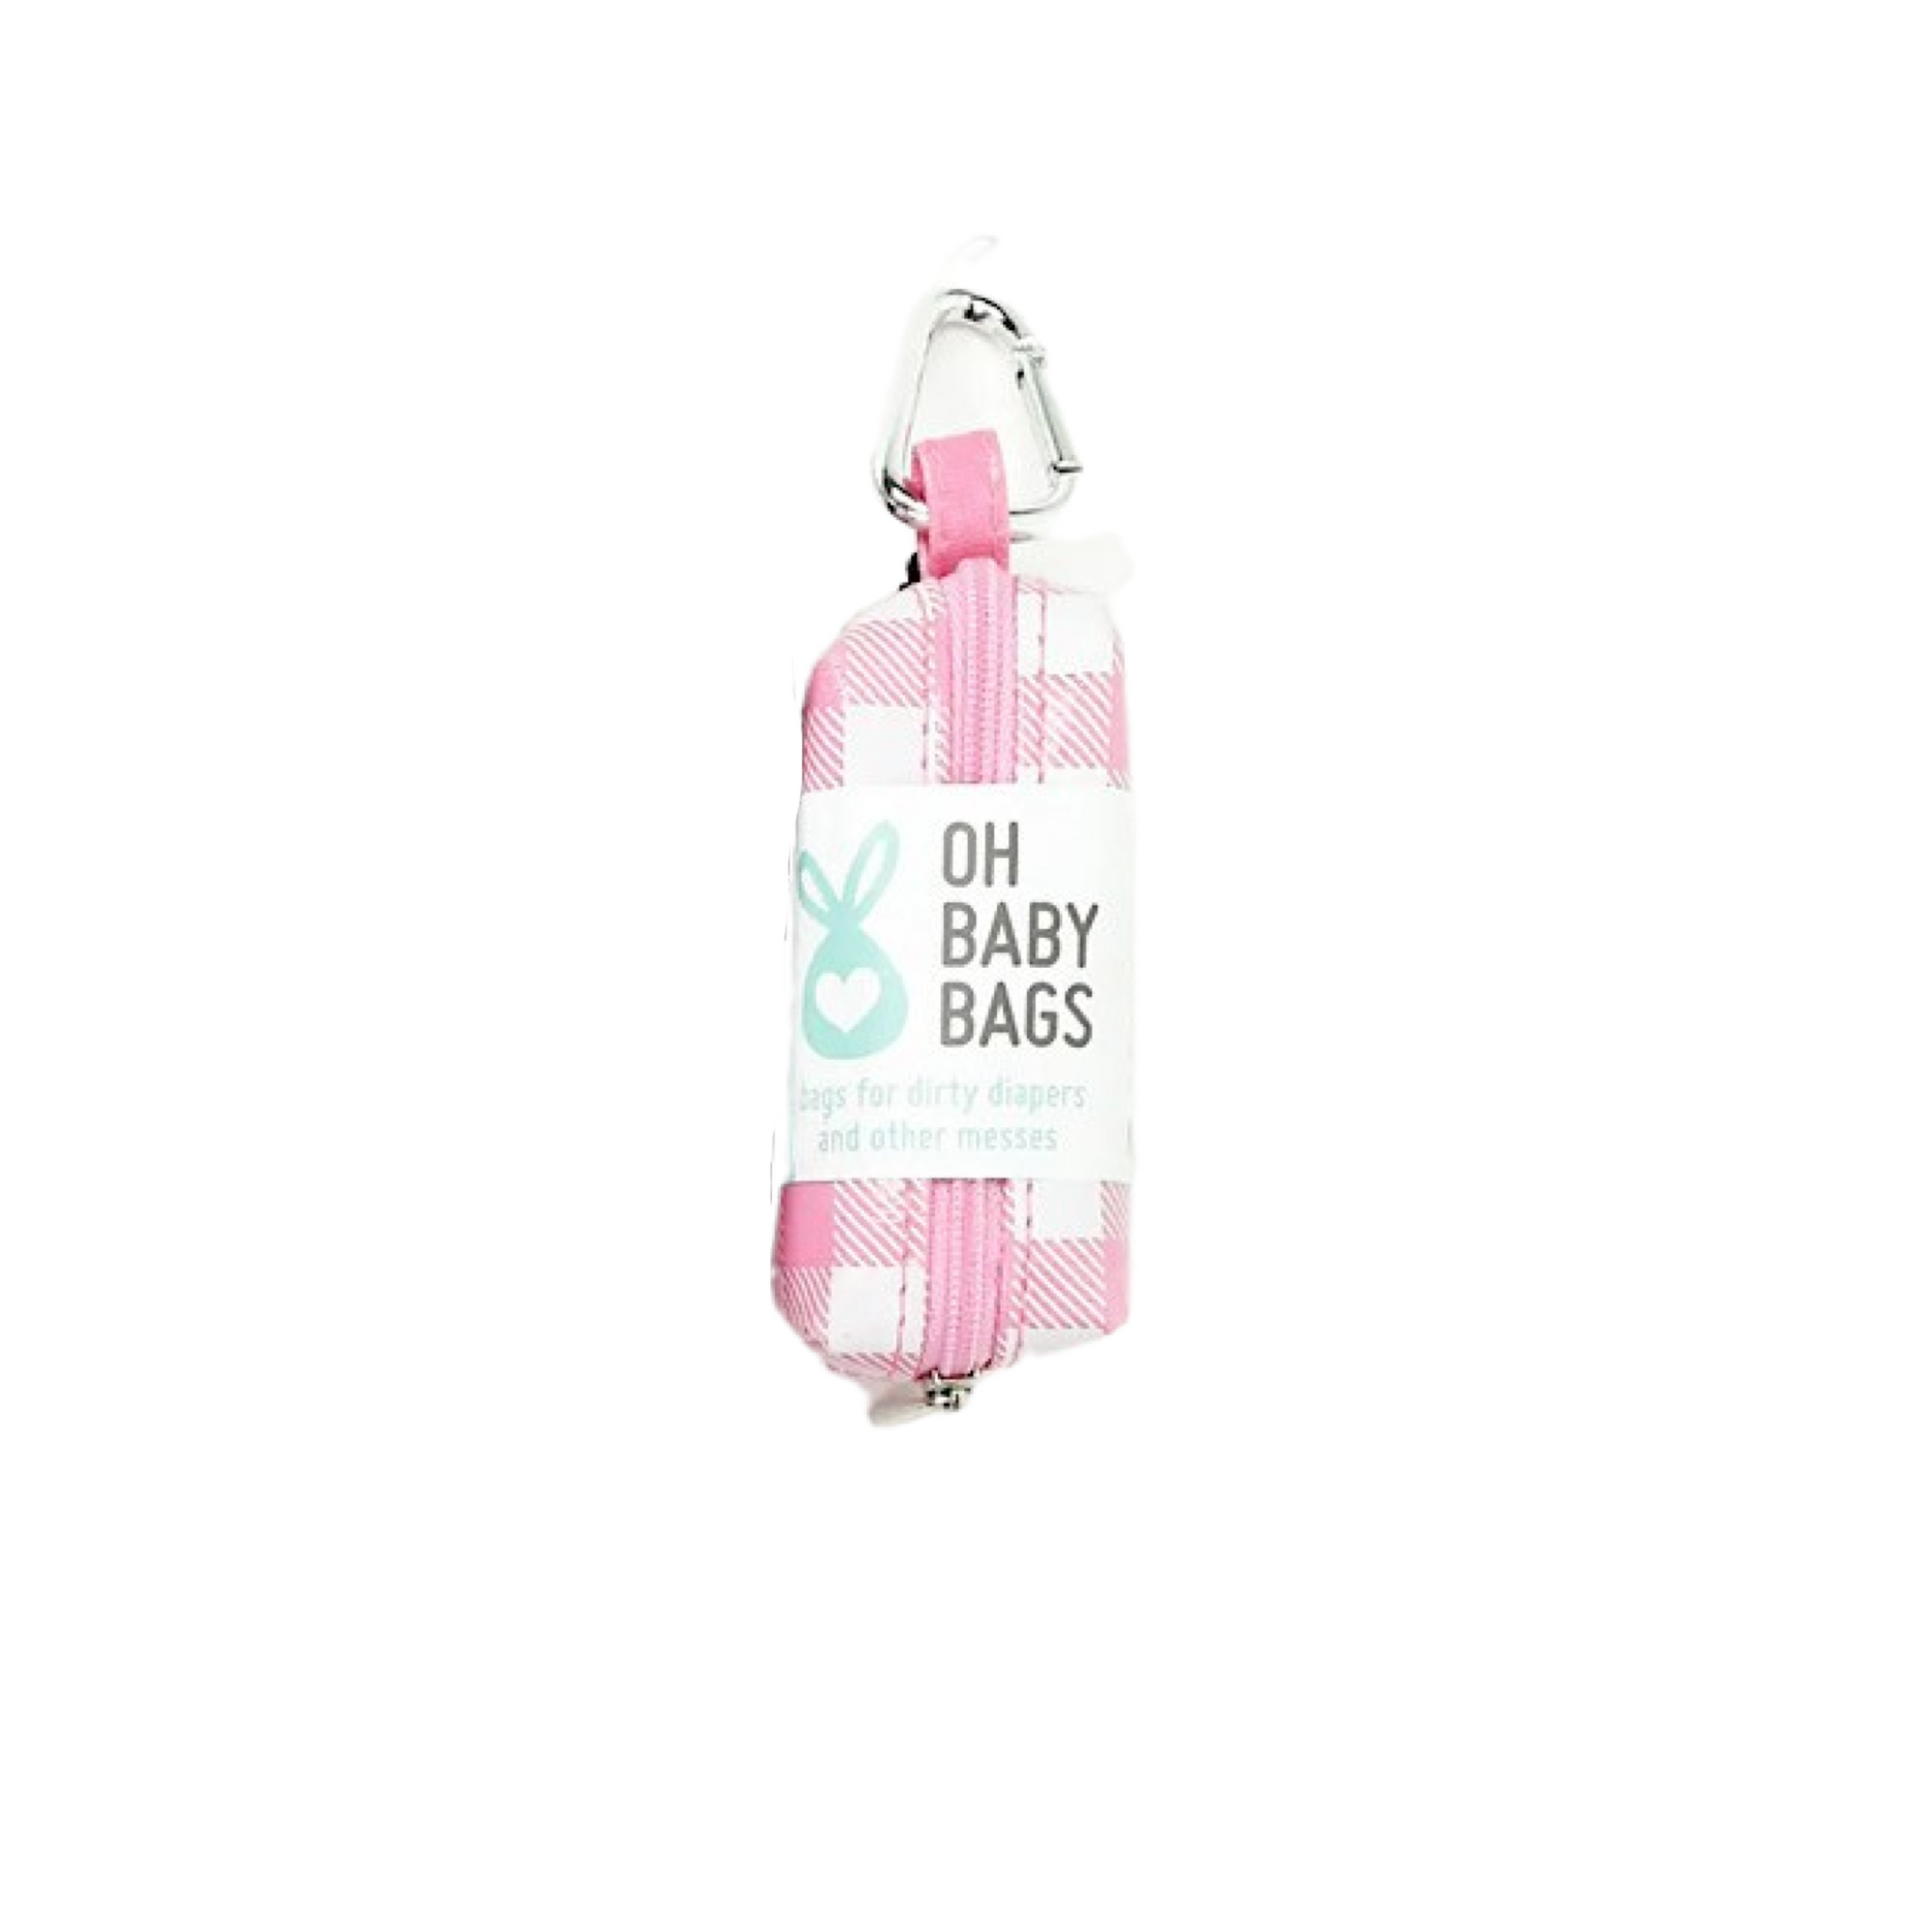 Oh Baby Mess Bags